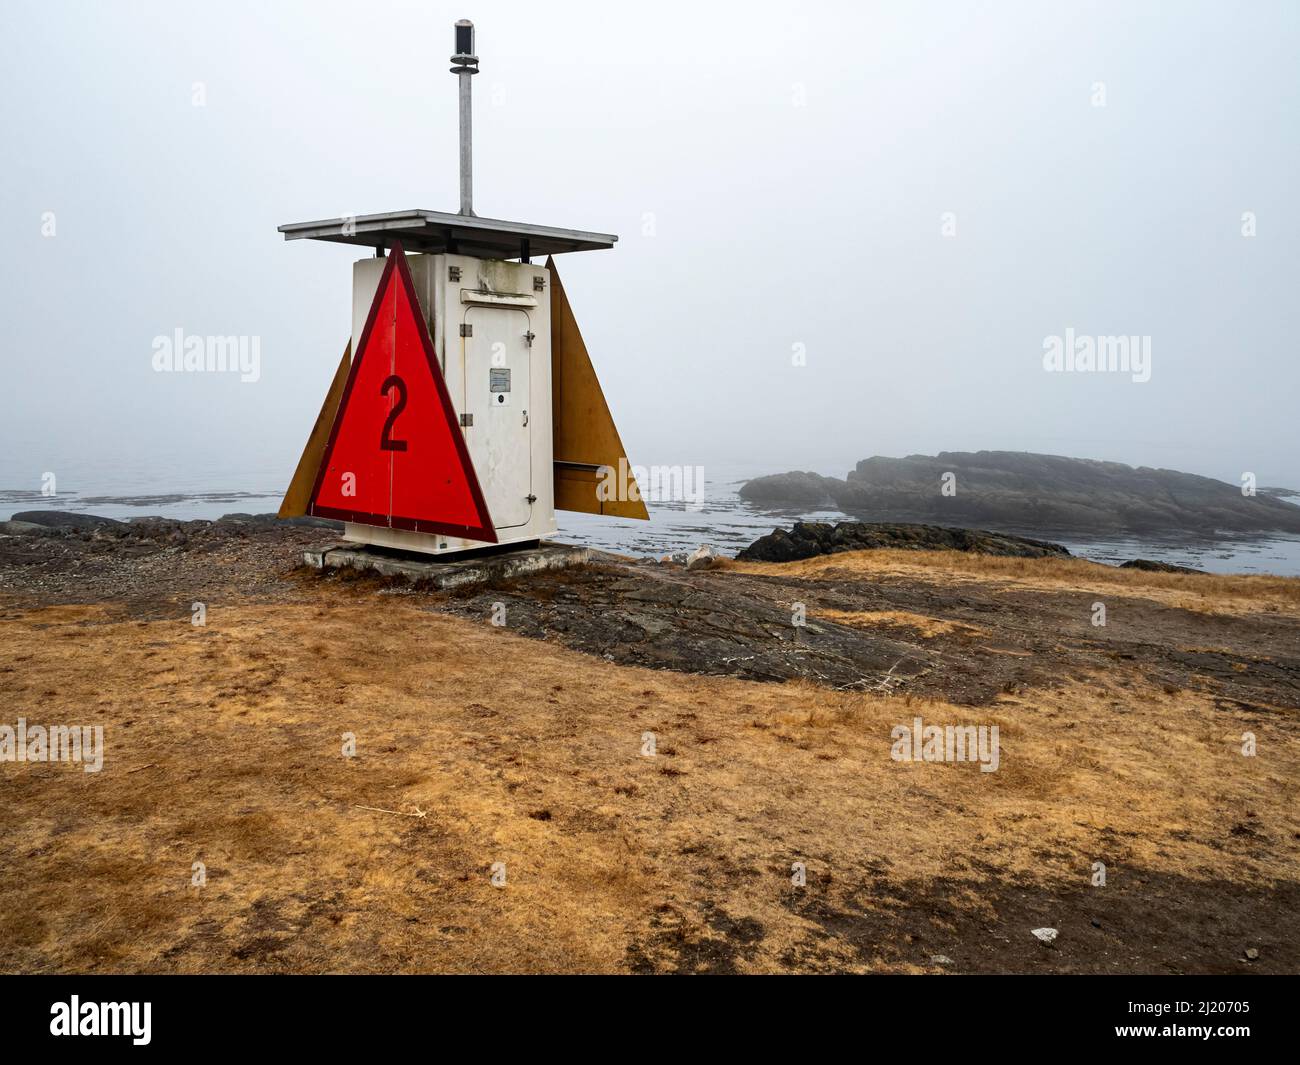 WA21190-00...WASHINGTON - A USGS Day Marker located on Iceberg Point on a foggy day at the southern end of Lopez Island. Stock Photo